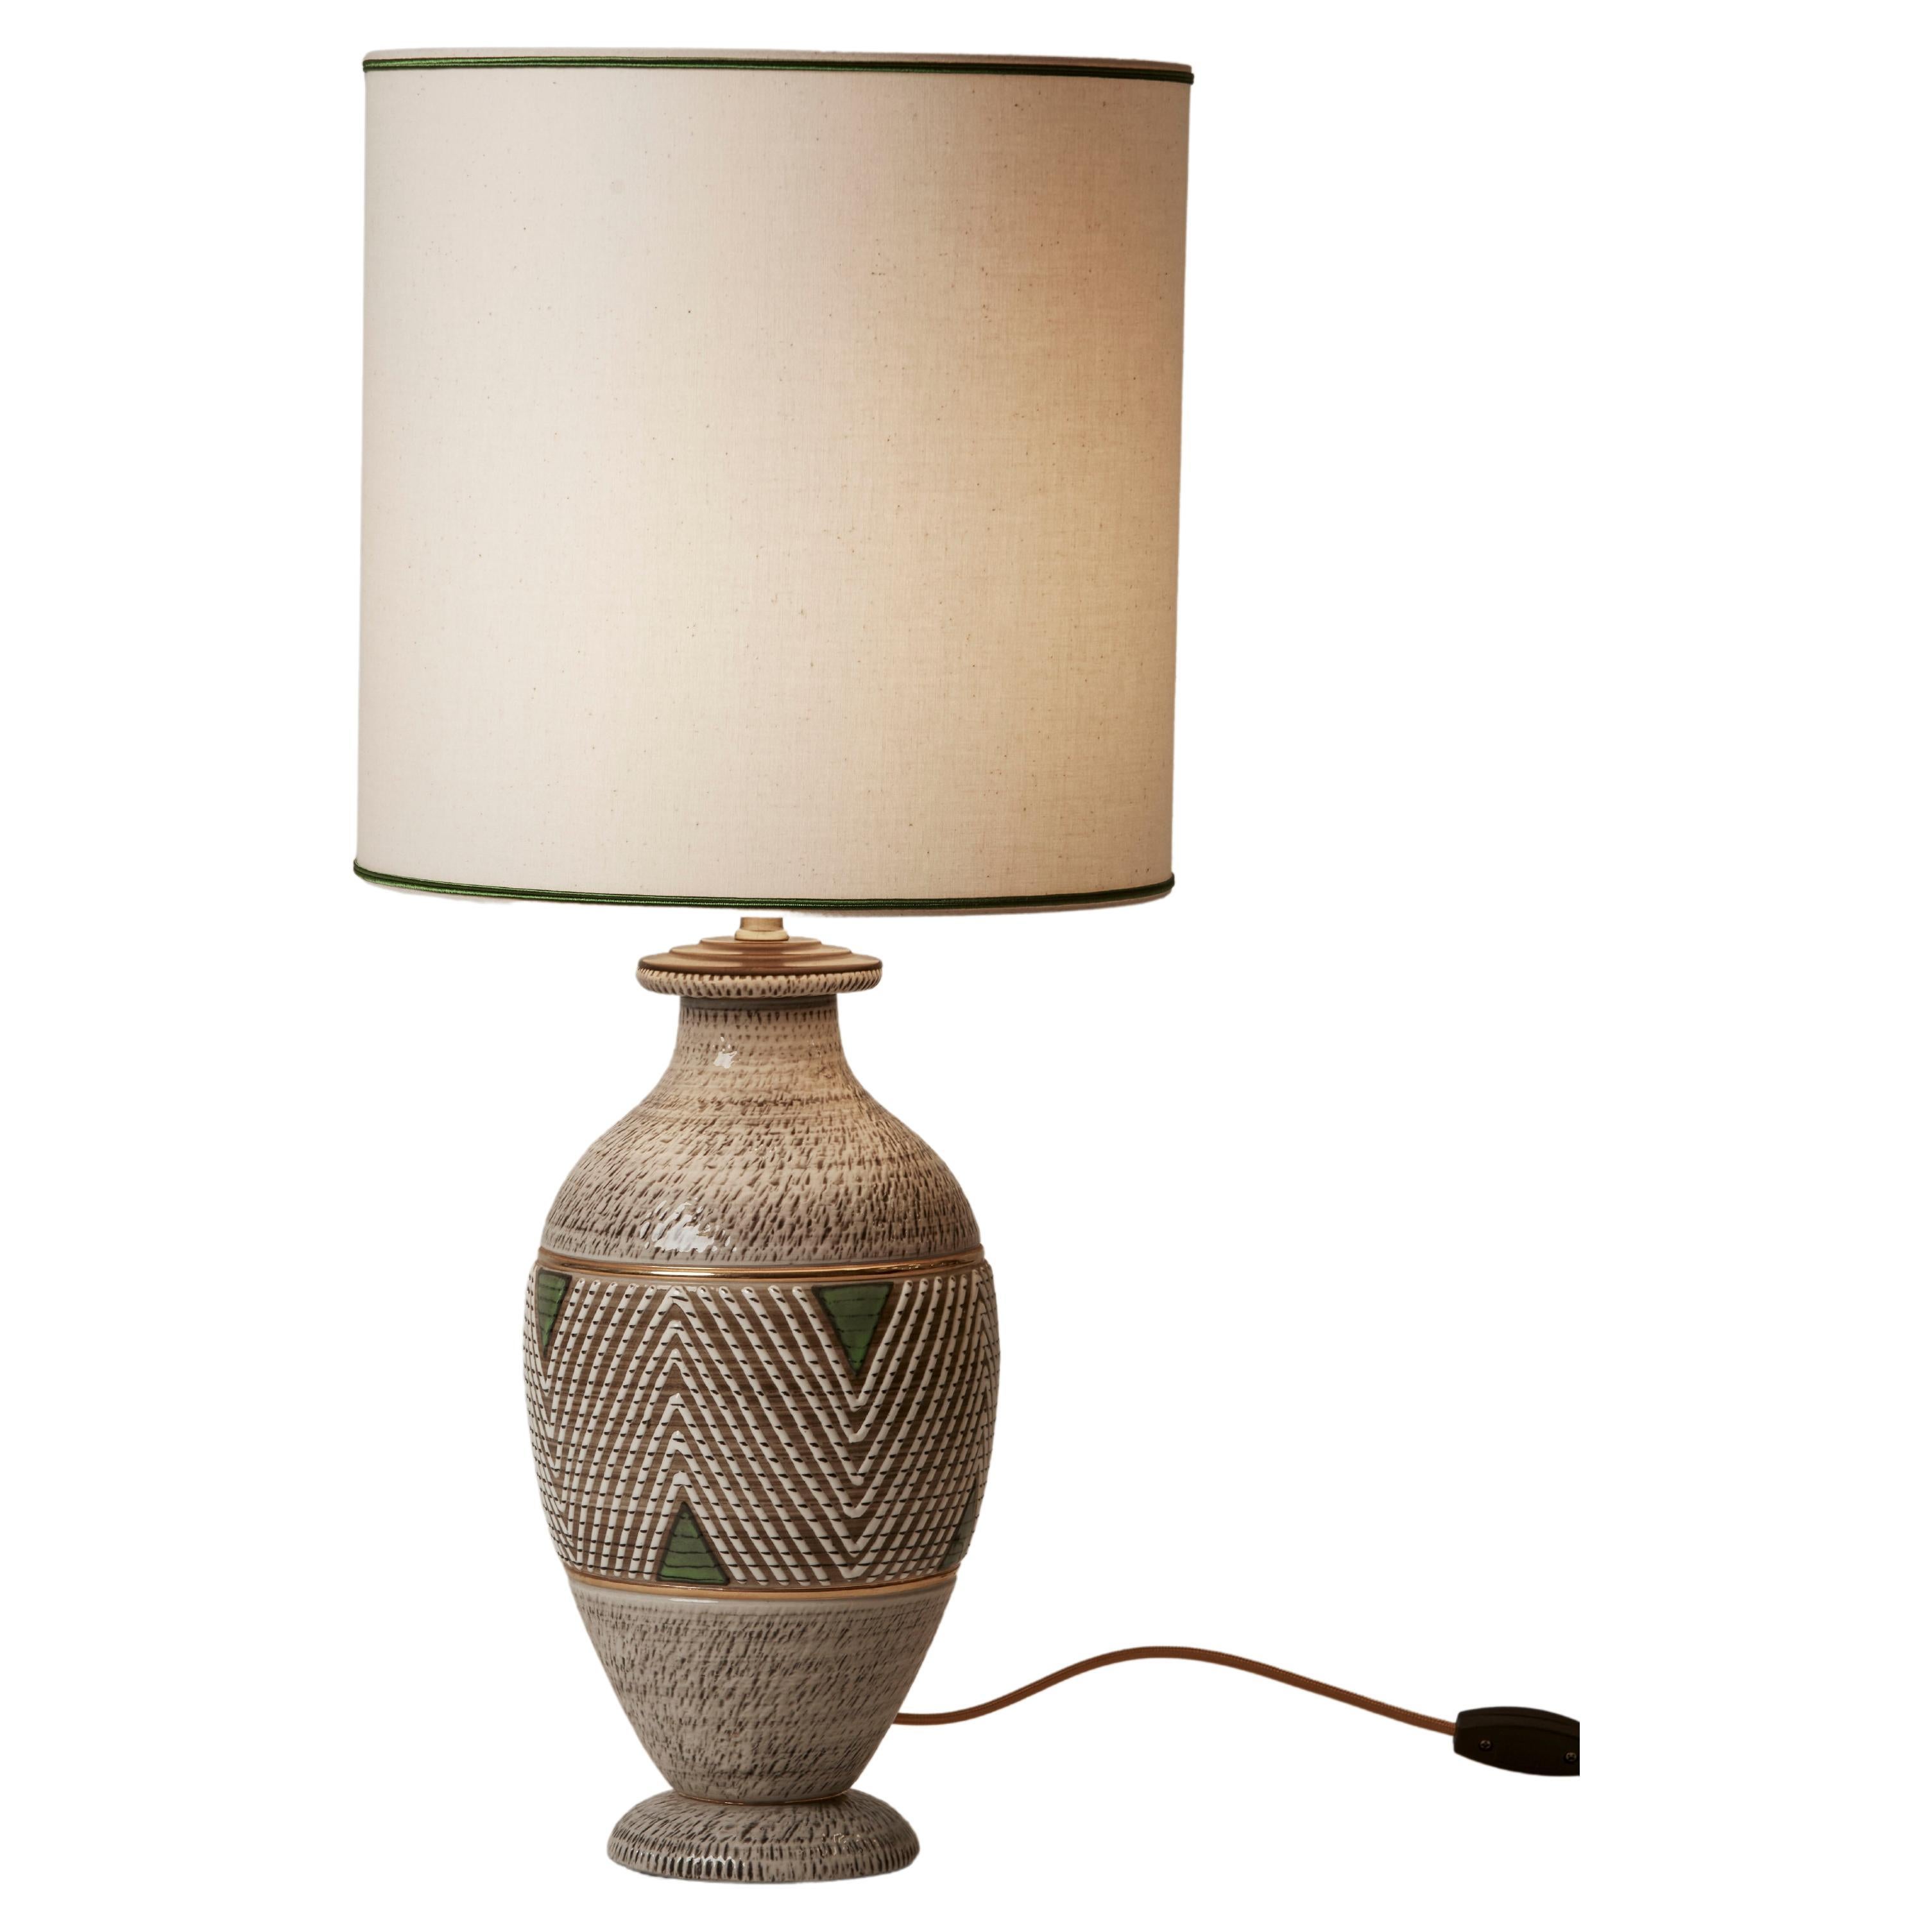 1970's Germany Ceramic White Green & Gilded Lamp with Shade For Sale